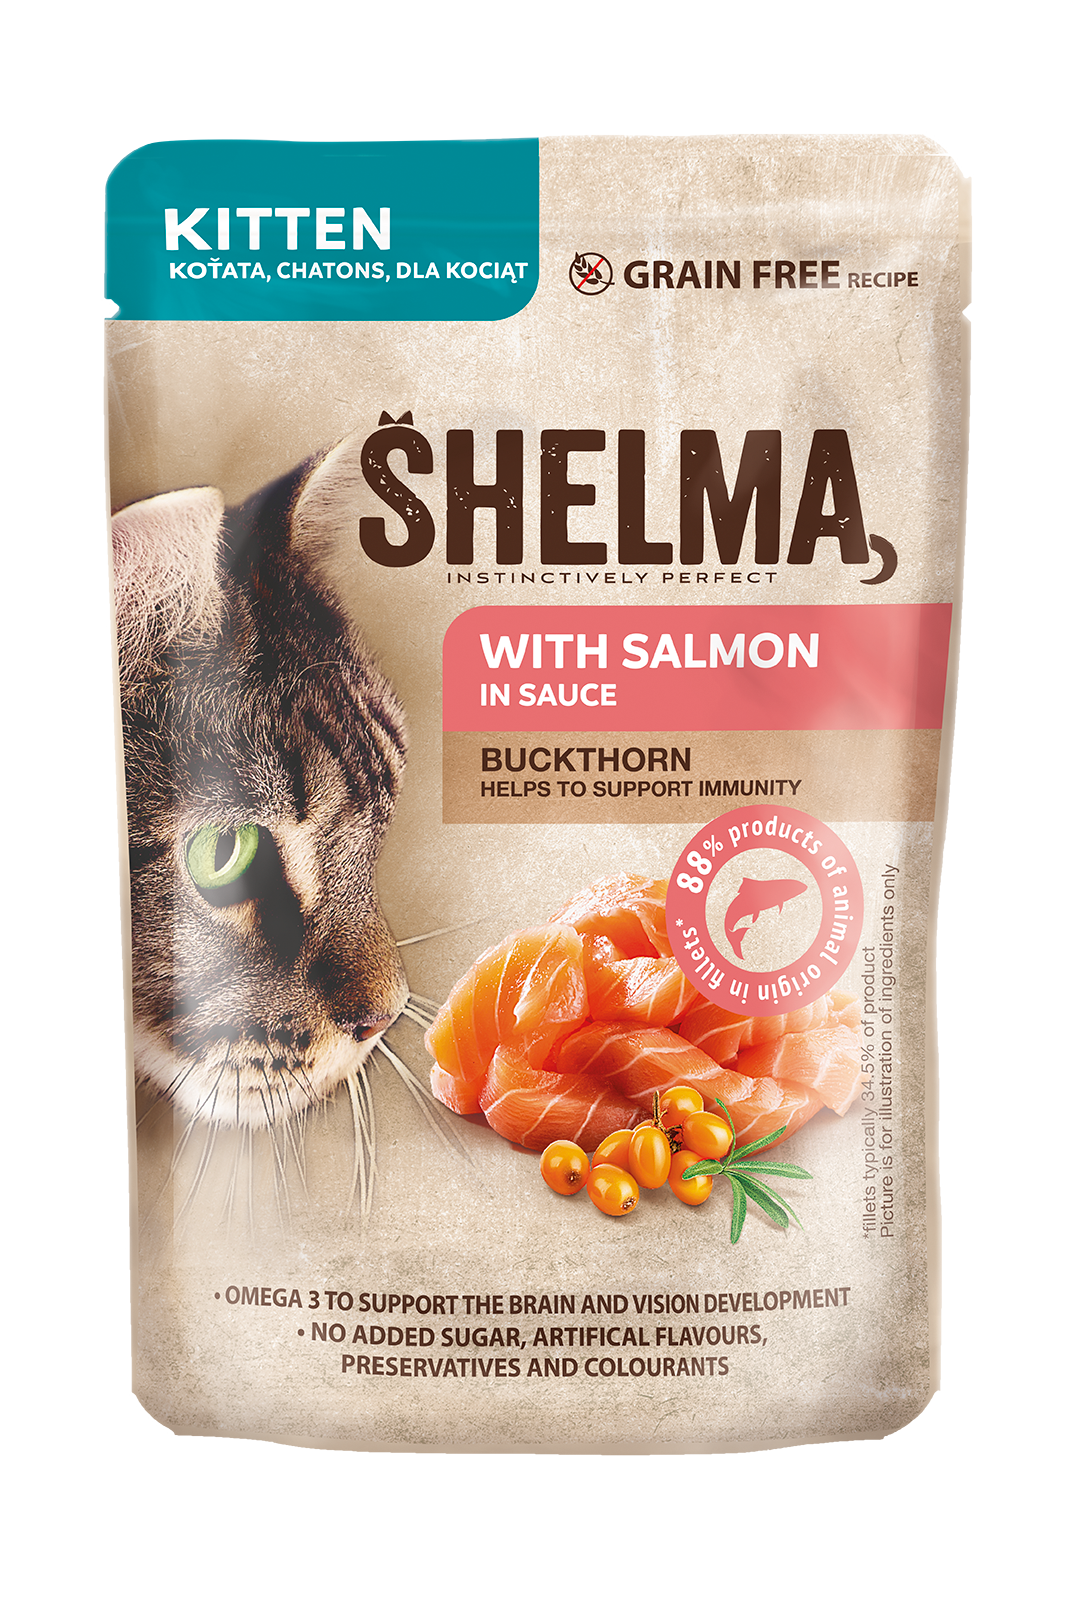 Steamed fillets for kitten with salmon and buckthorn in sauce